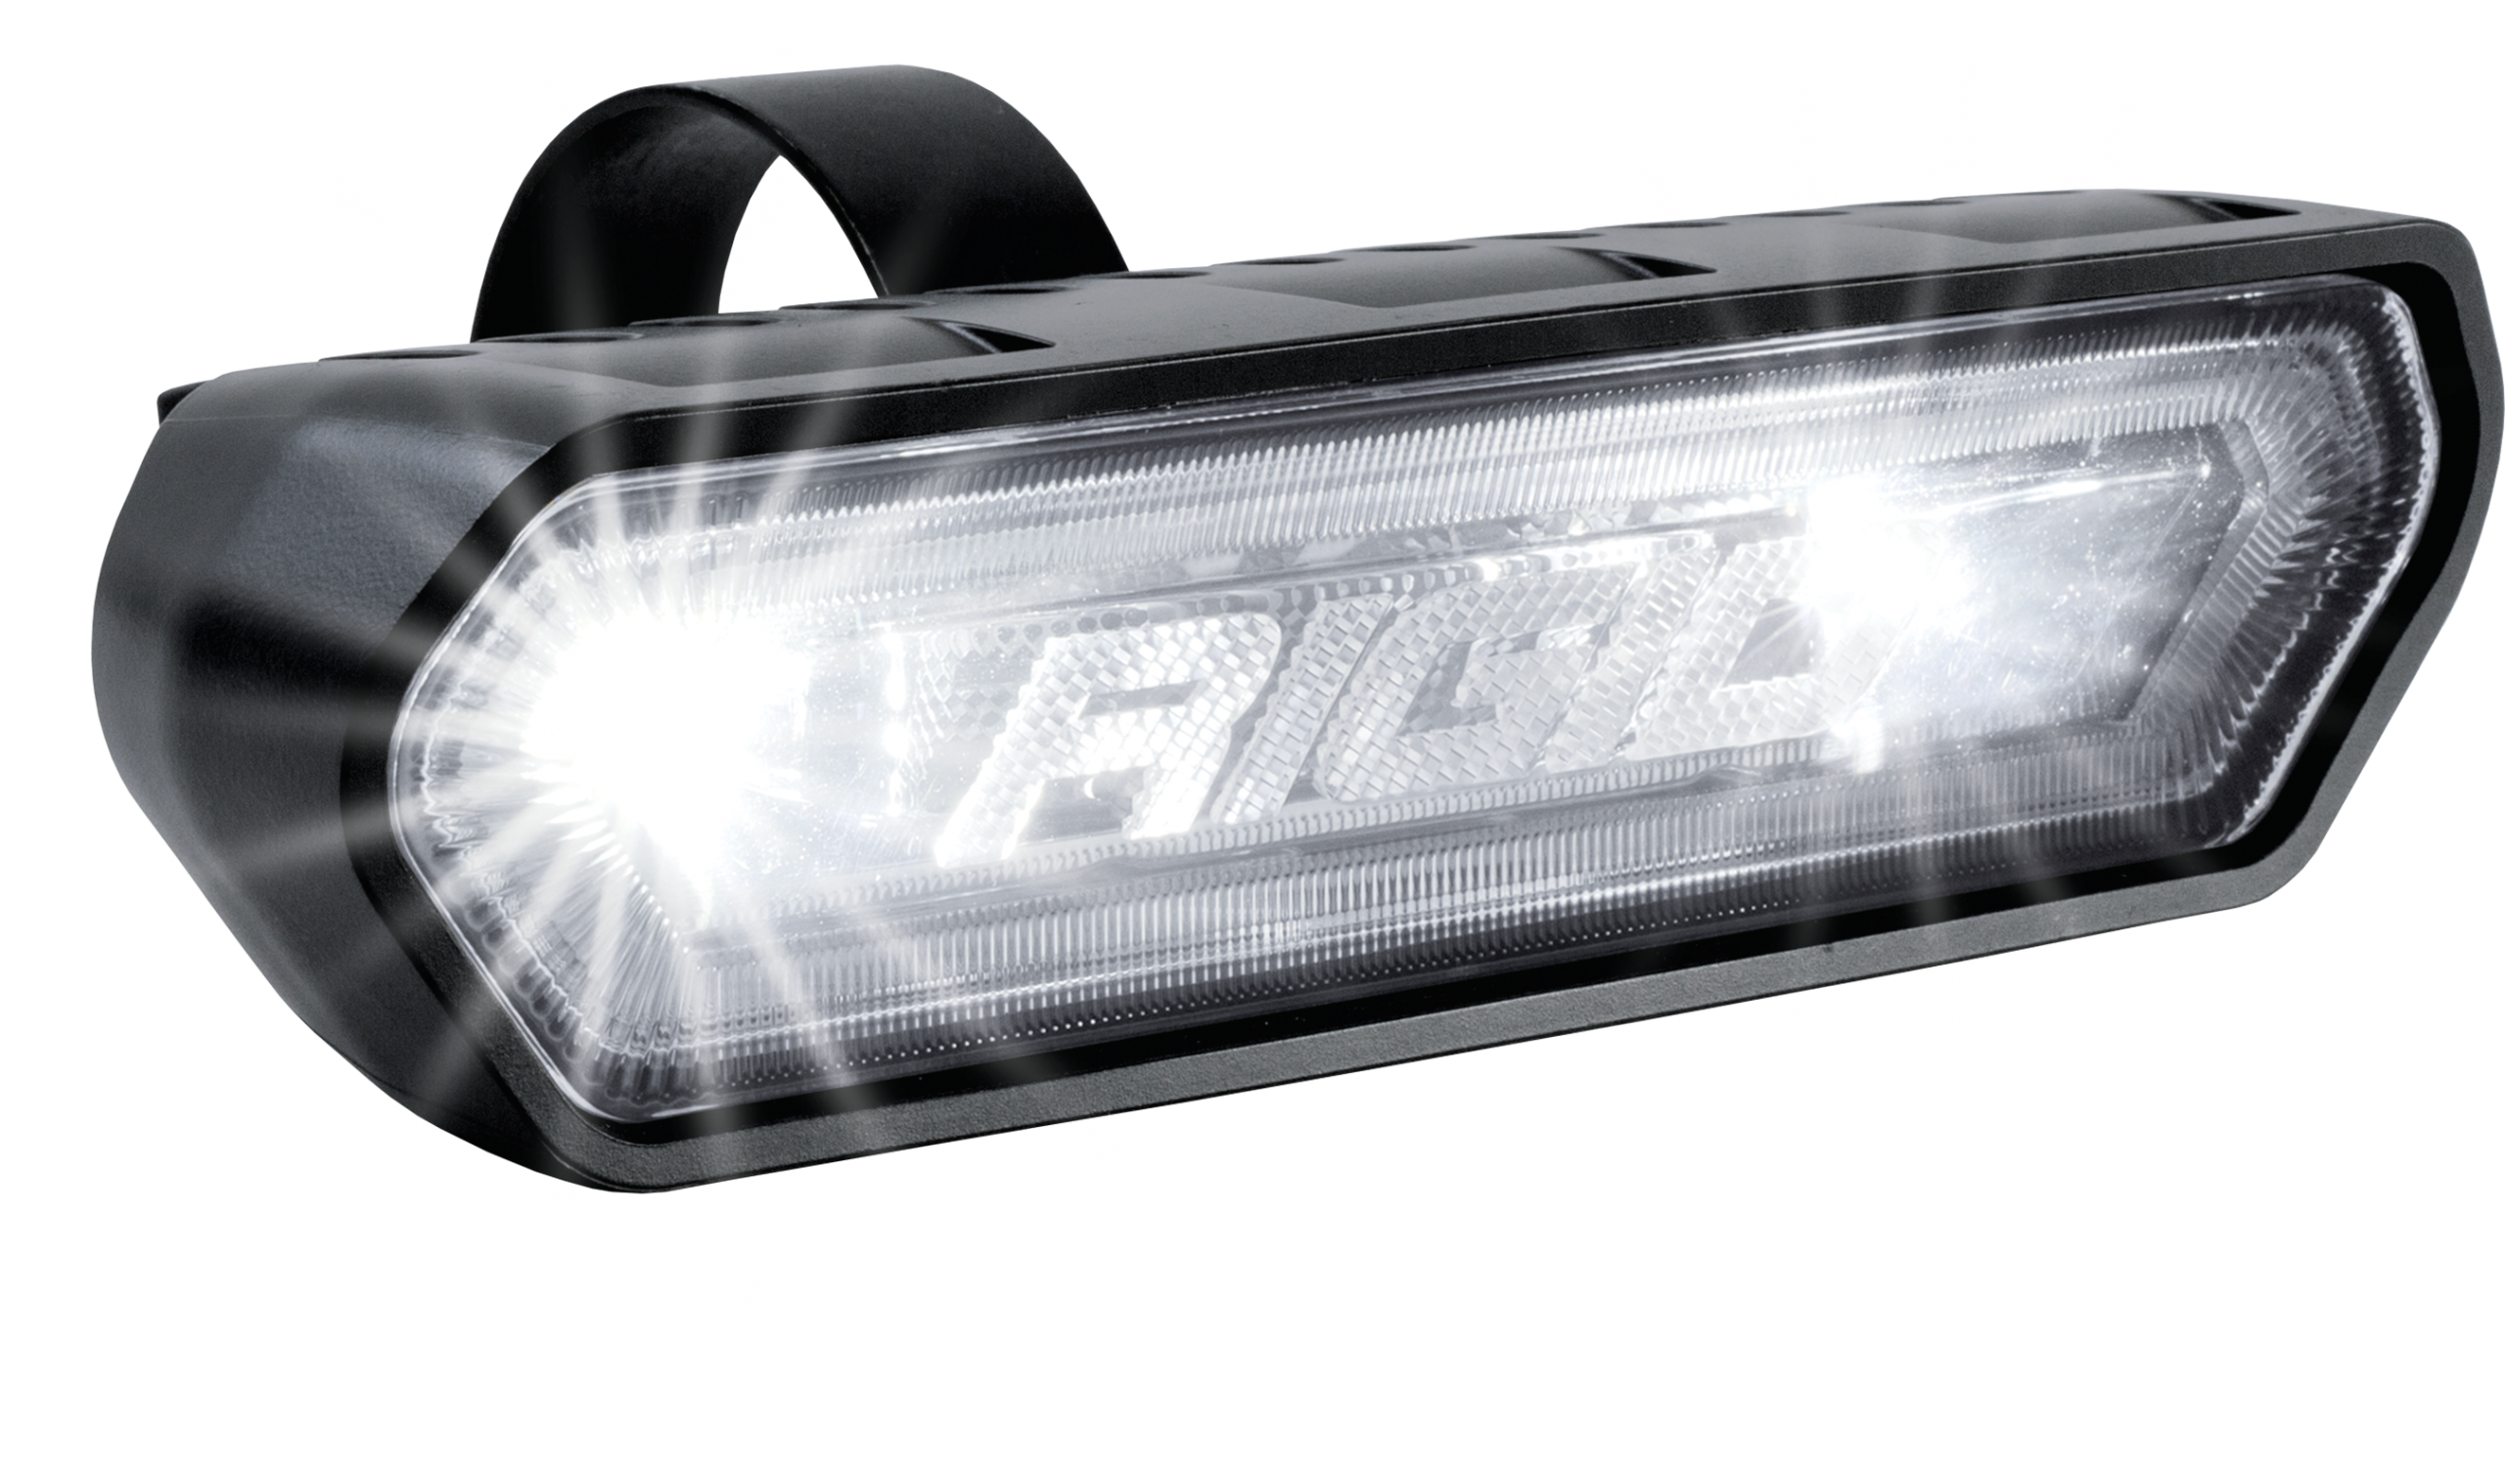 Rigid Industries 28 Inch LED Light Bar Rear Facing 27 Mode 5 Color Tube Mount Chase Series - Click Image to Close